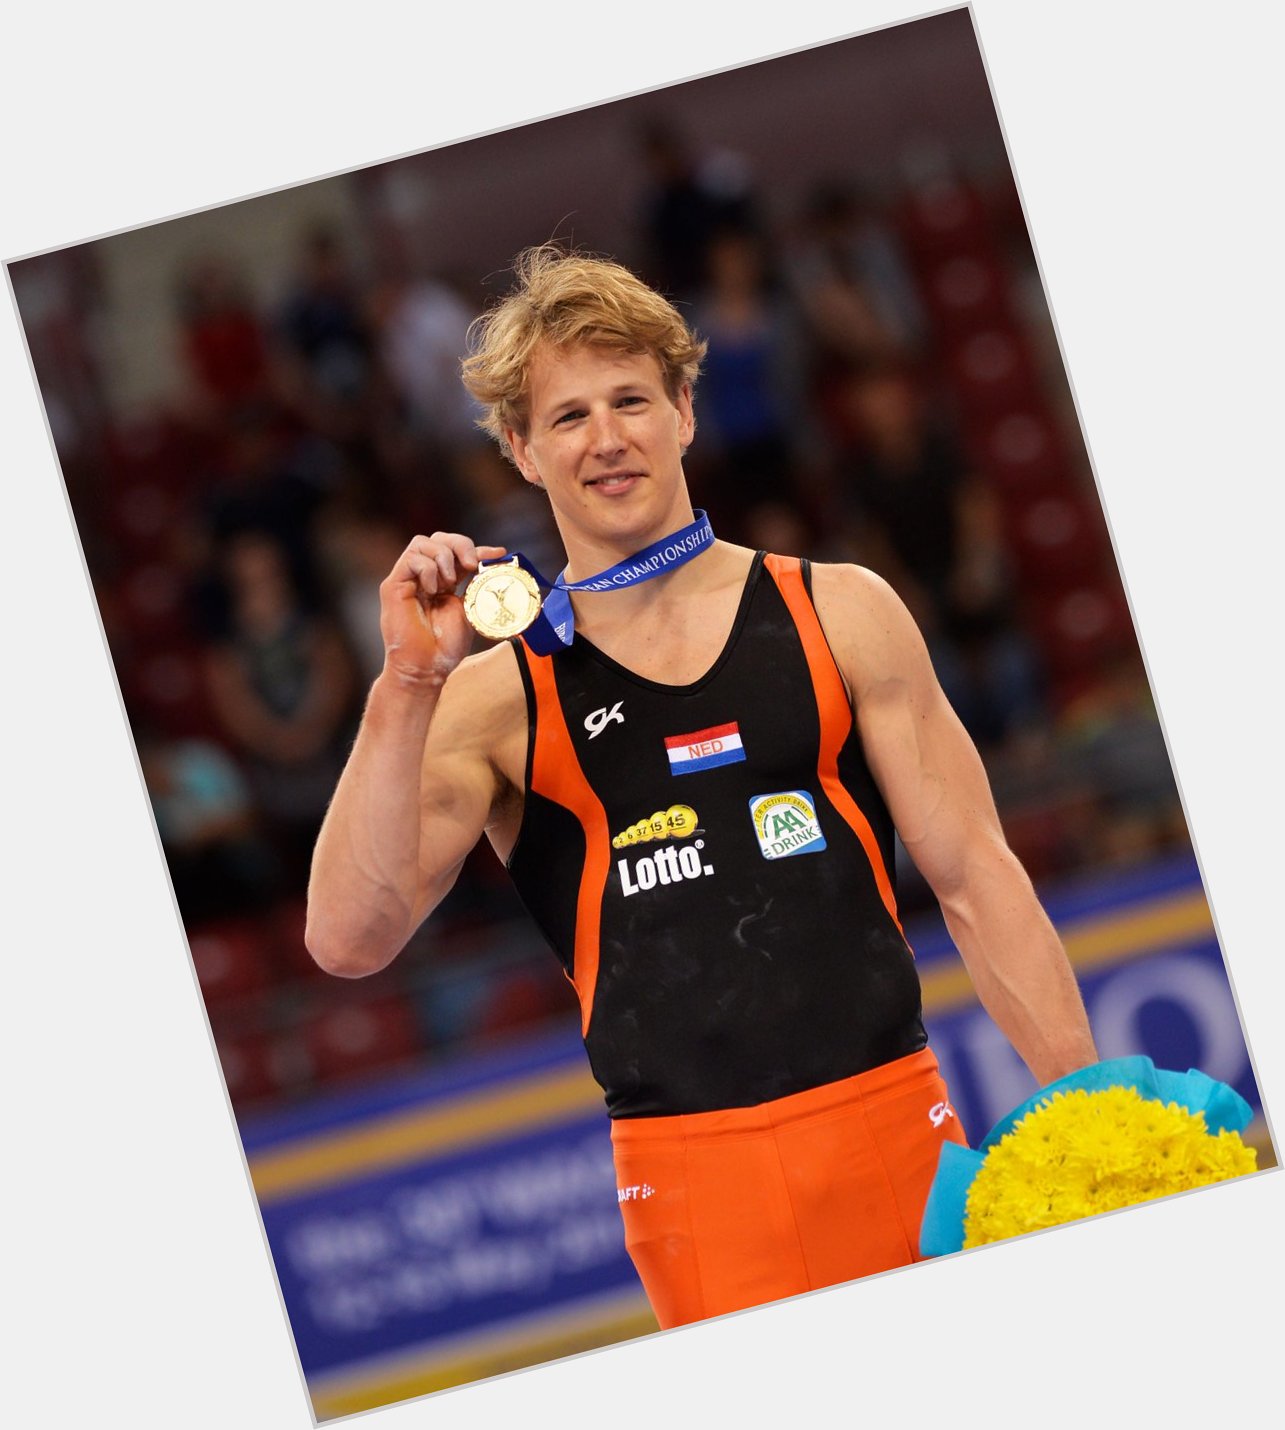 Happy birthday to Epke Zonderland (NED) who is currently warming up on parallel bars. Good luck! 